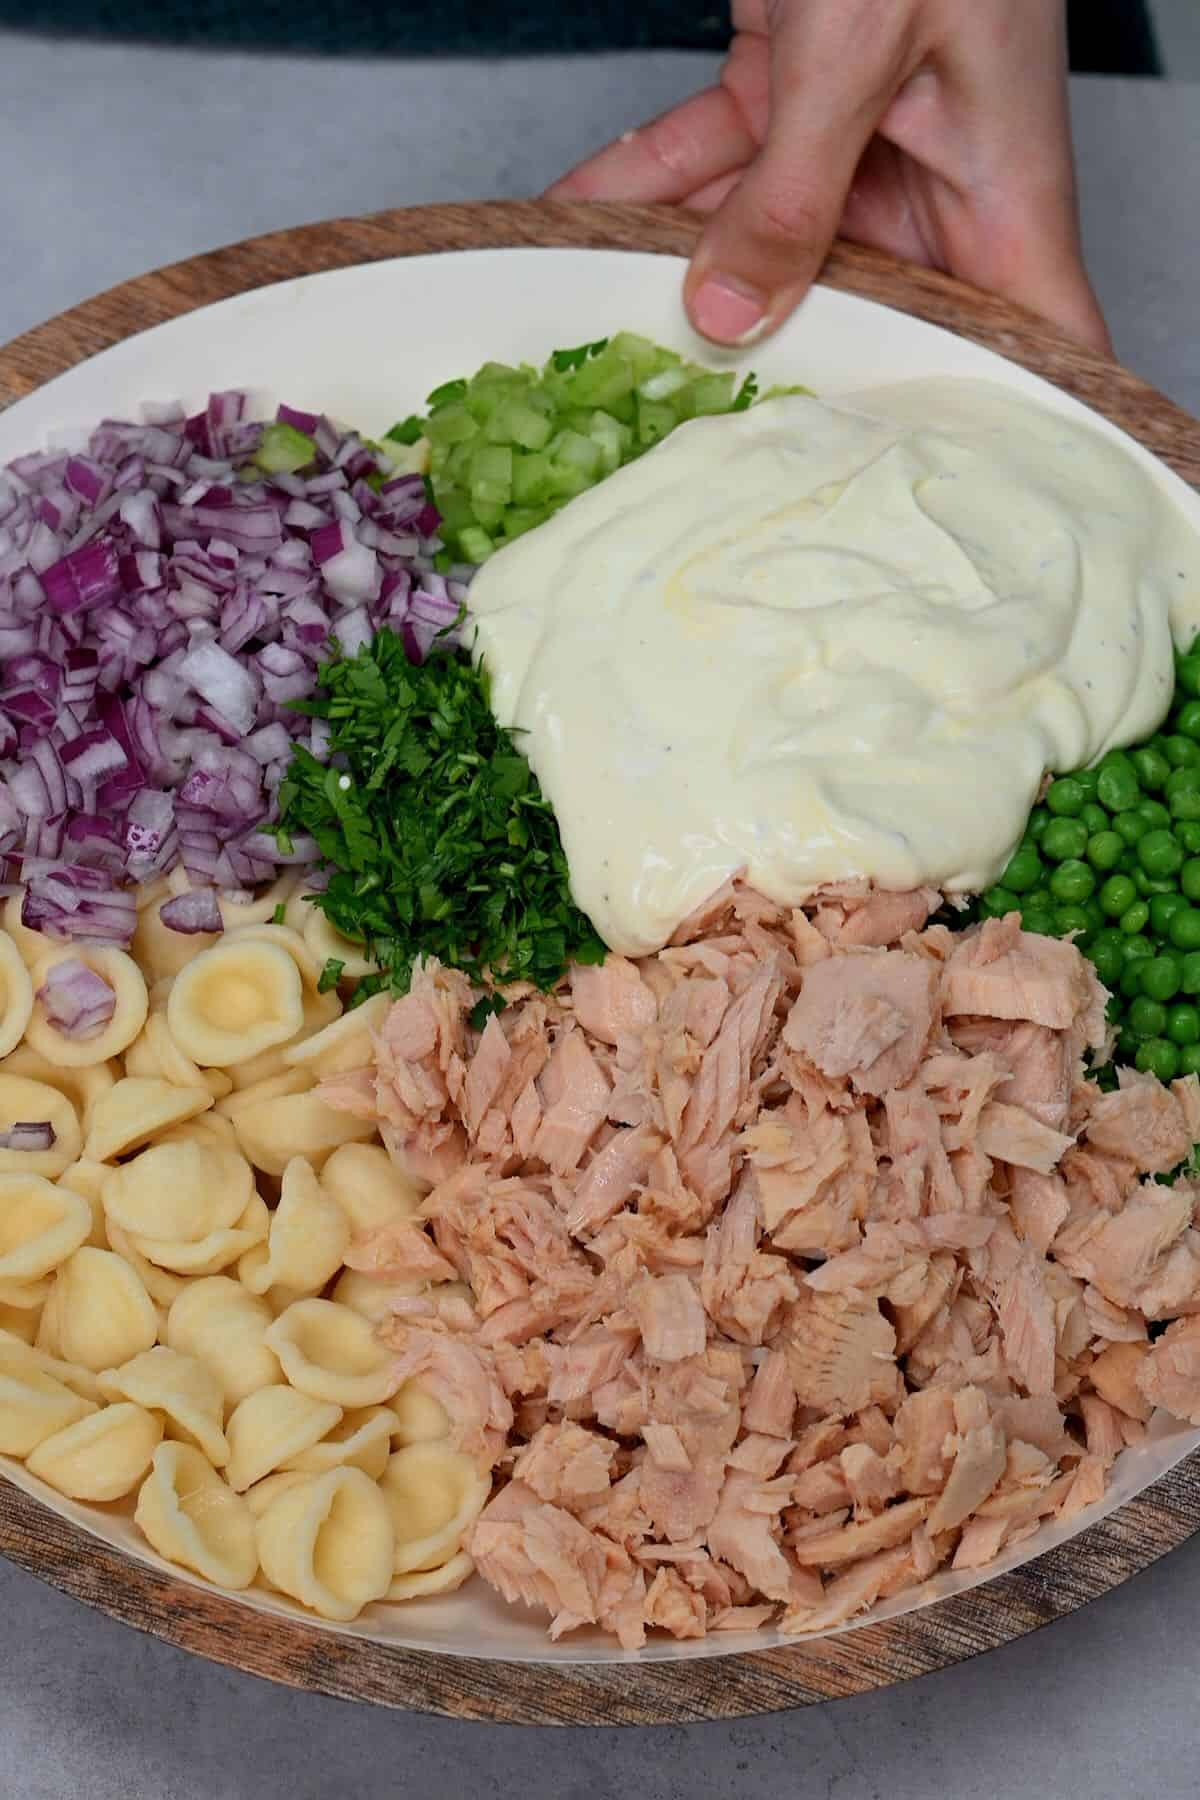 All the elements for tuna pasta salad in a bowl